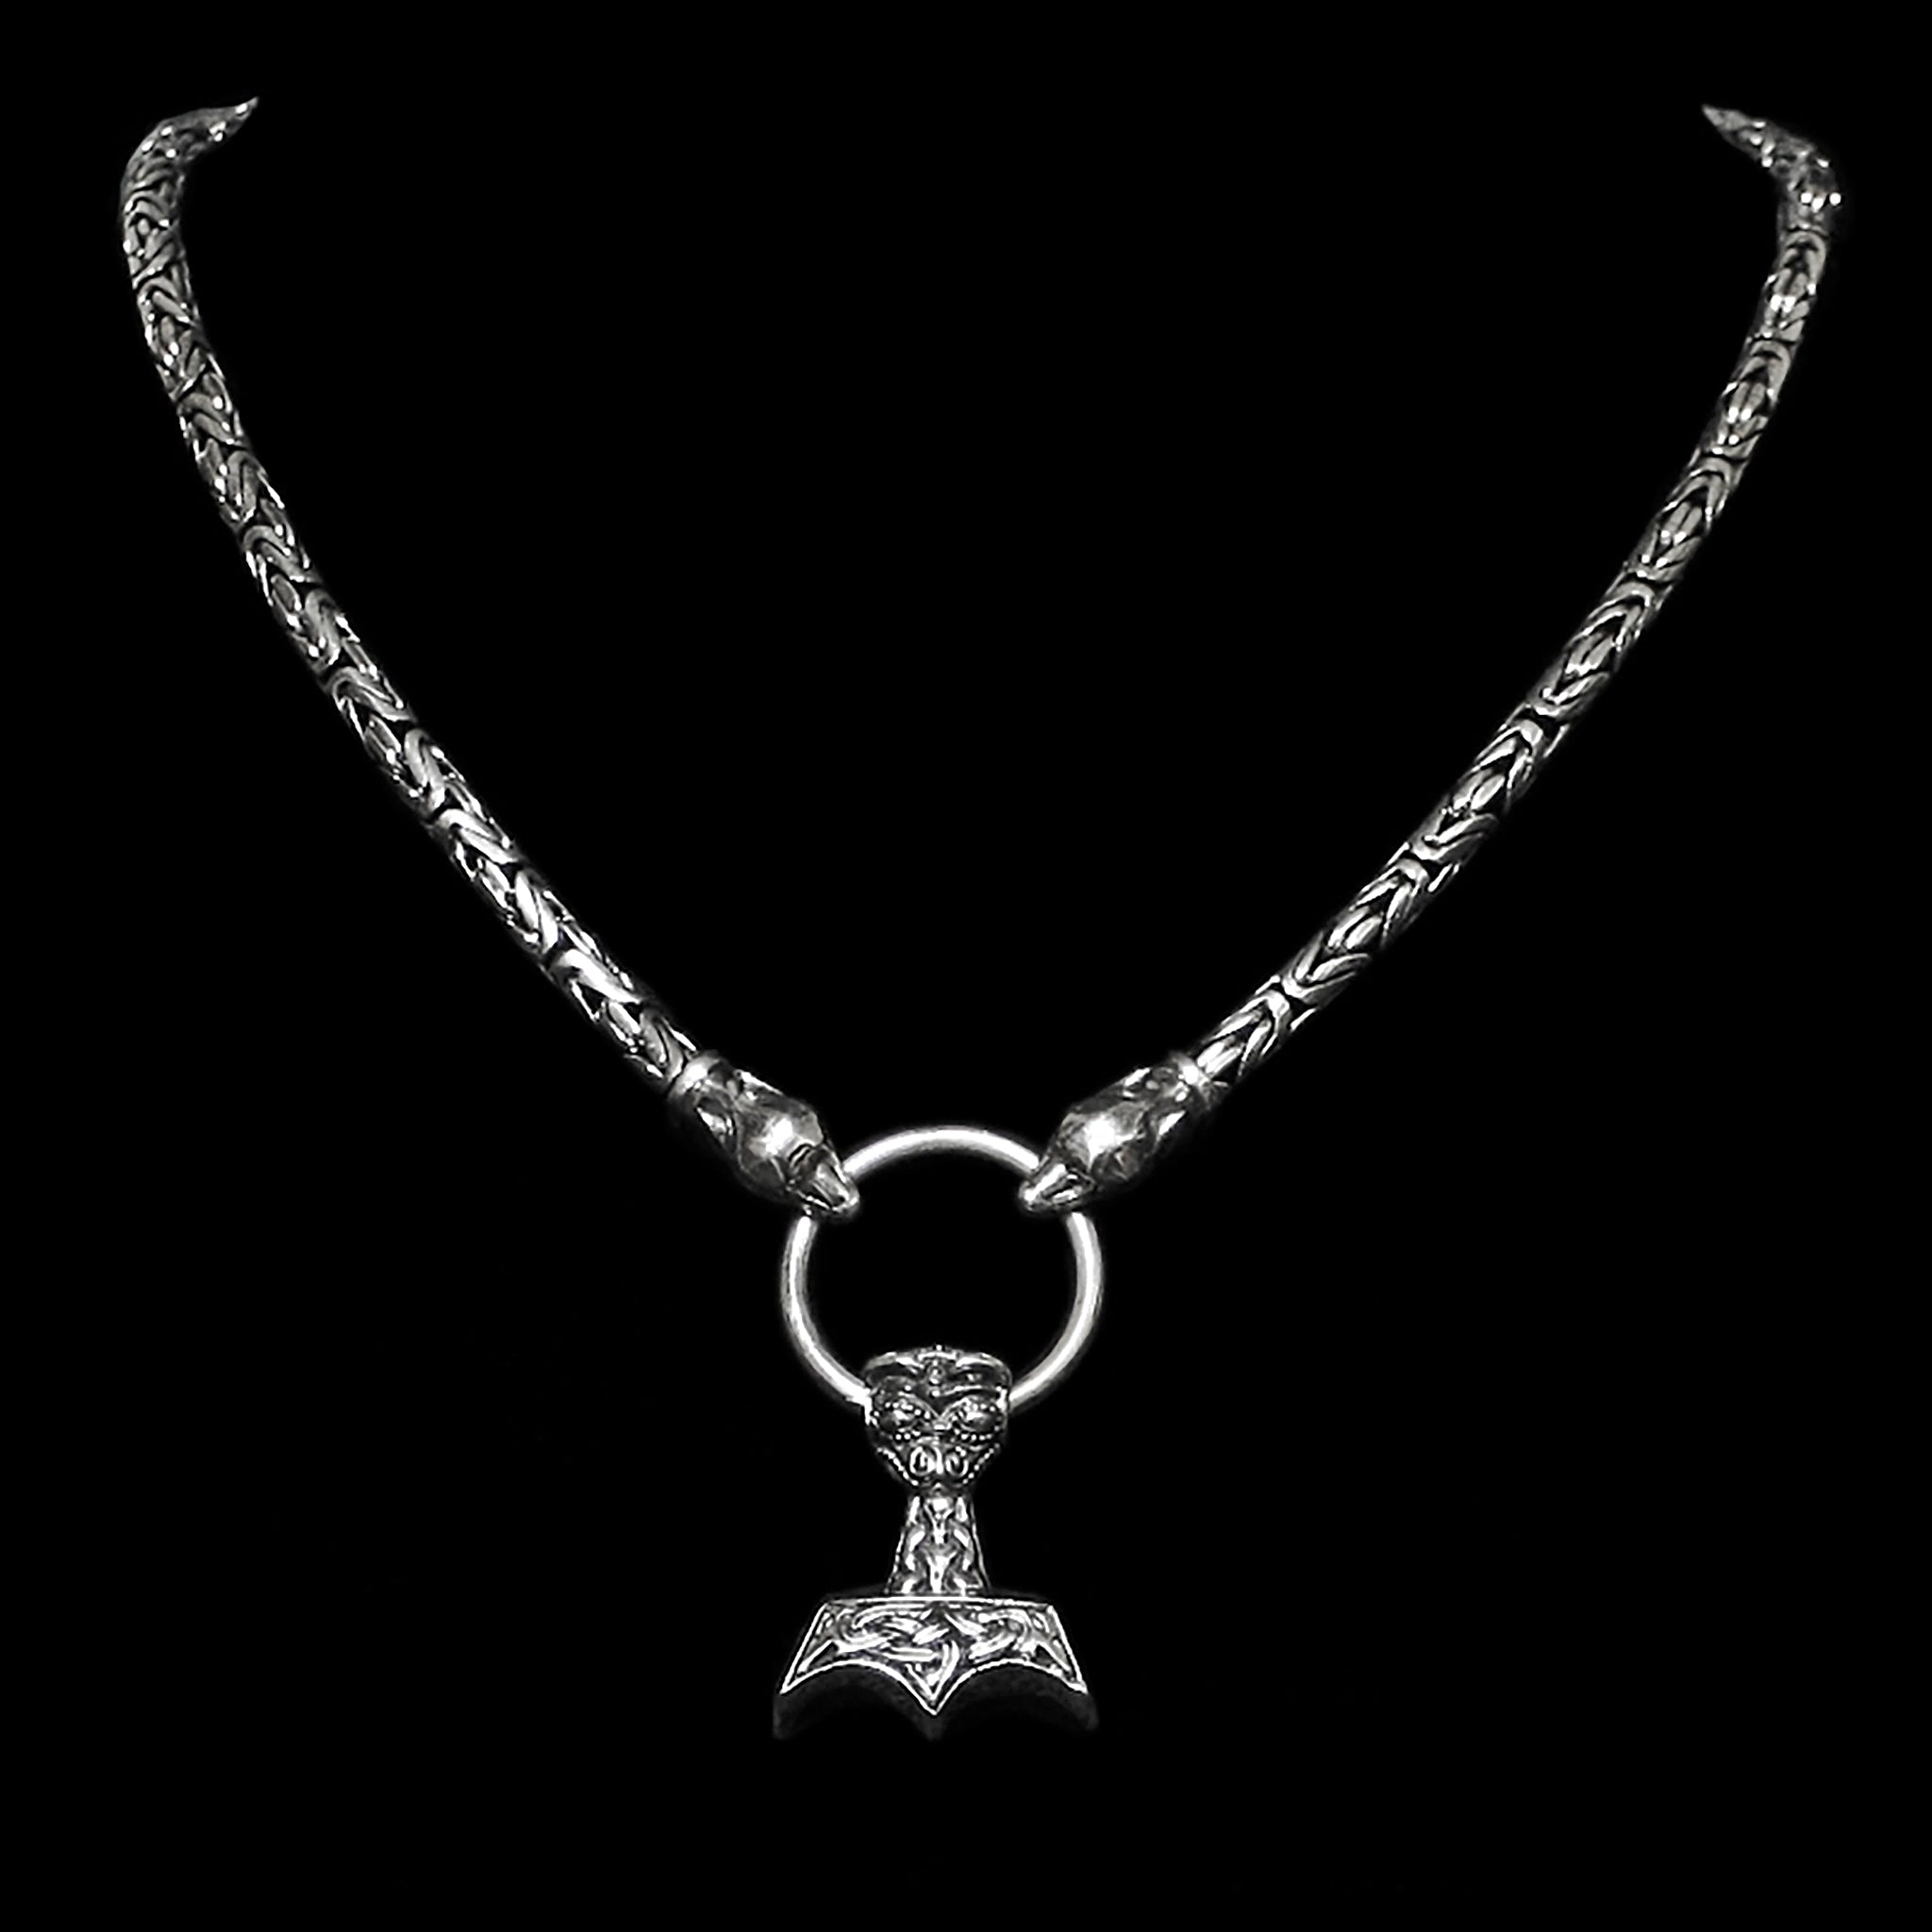 5mm Thick Silver King Chain Thors Hammer Necklace with Ferocious Wolf Heads - Ferocious Beast Thors Hammer